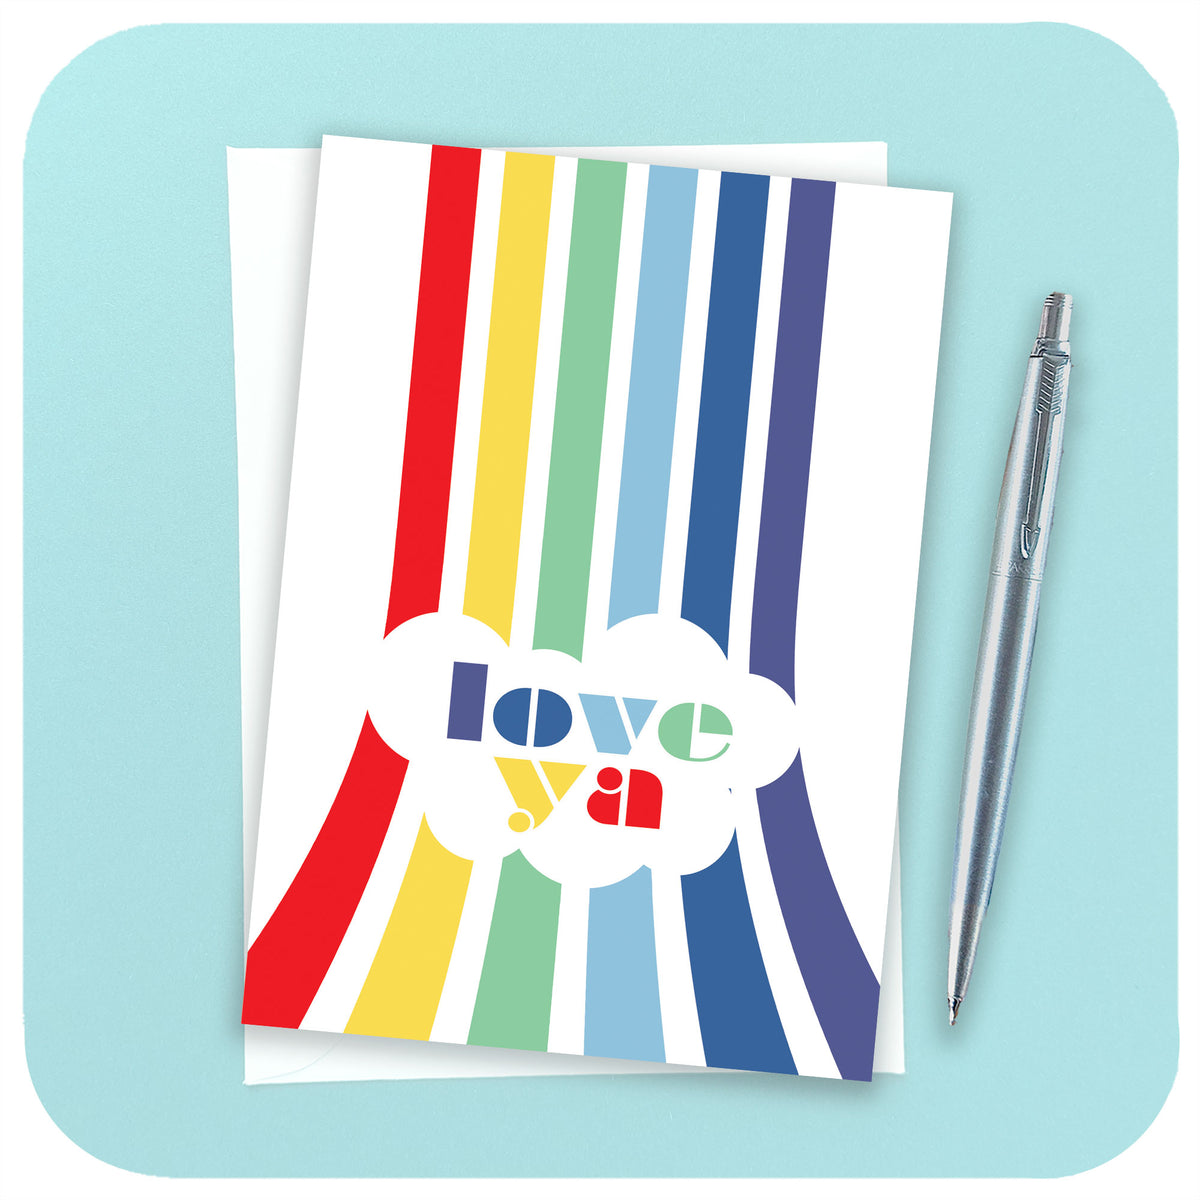 An A6 greetings card featuring a vertical rainbow with the words "Love Ya" sits on a white envelope beside a chrome pen on a light blue background | The Inkabilly Emporium